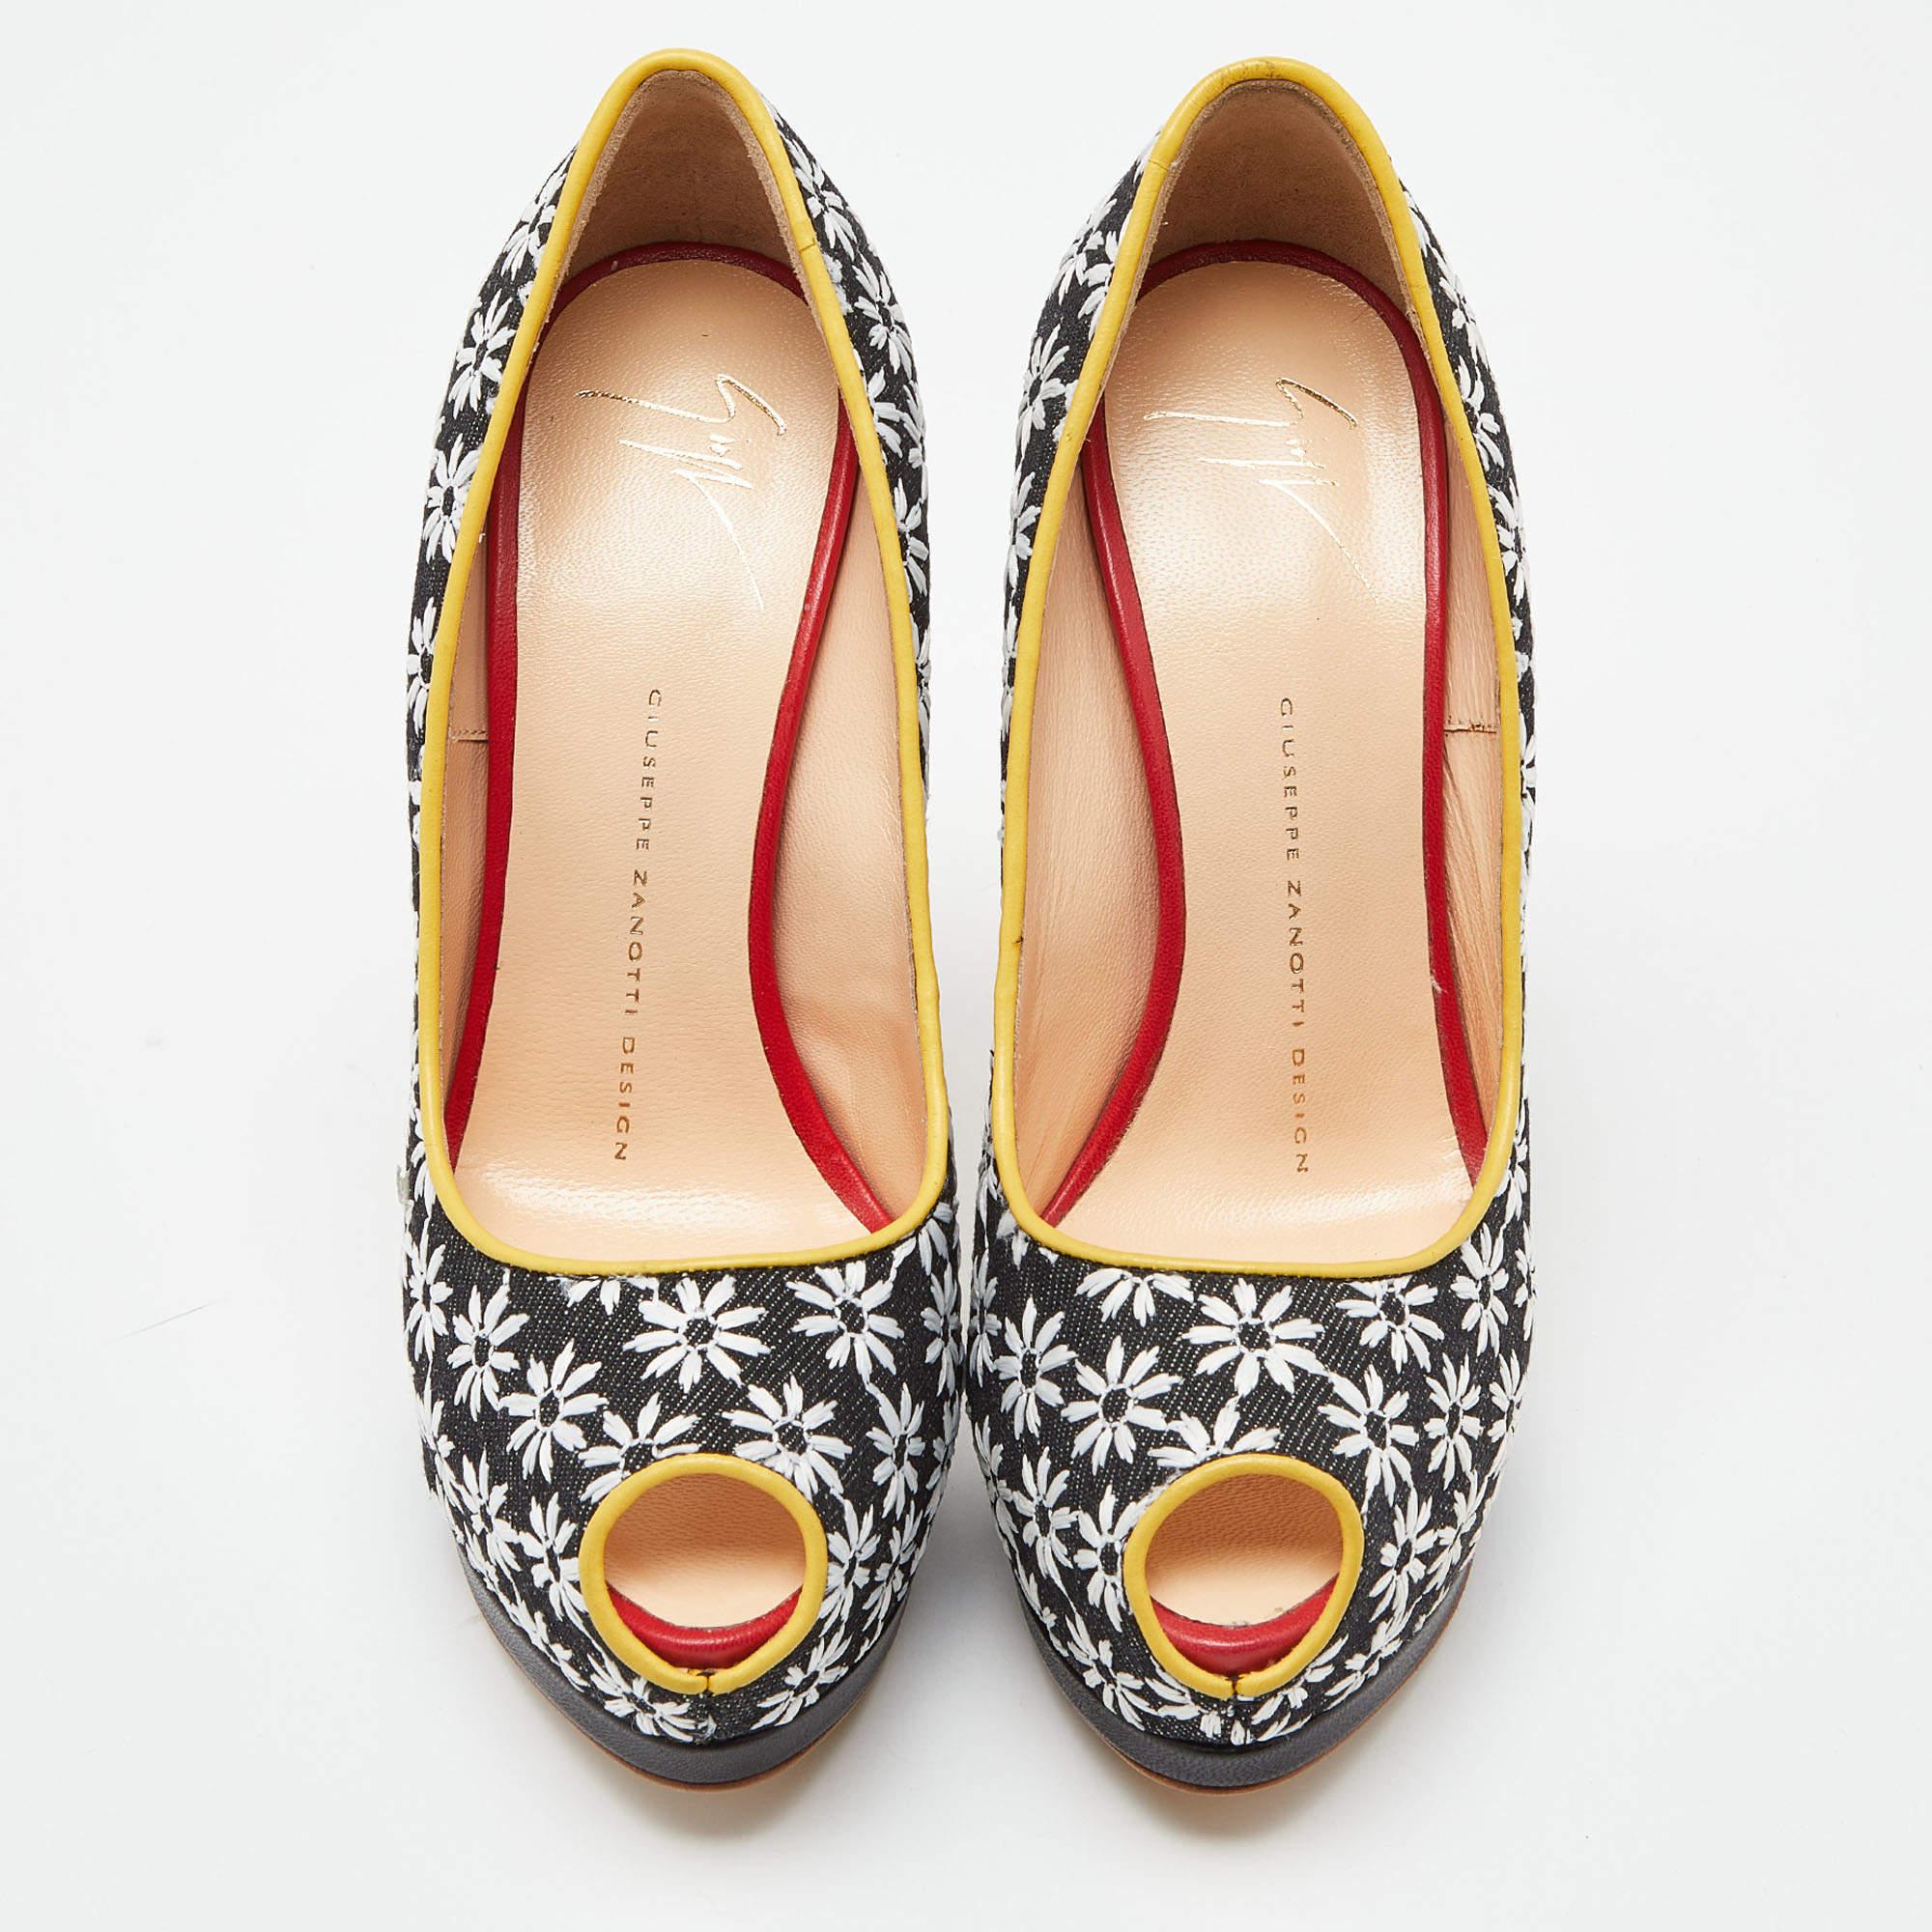 Own this meticulously designed pair of Giuseppe Zanotti pumps today and dazzle everyone whenever you step out! Crafted out of embroidered canvas, these pumps feature peep-toes. They have been beautified with 15.5cm heels.

Includes: Original